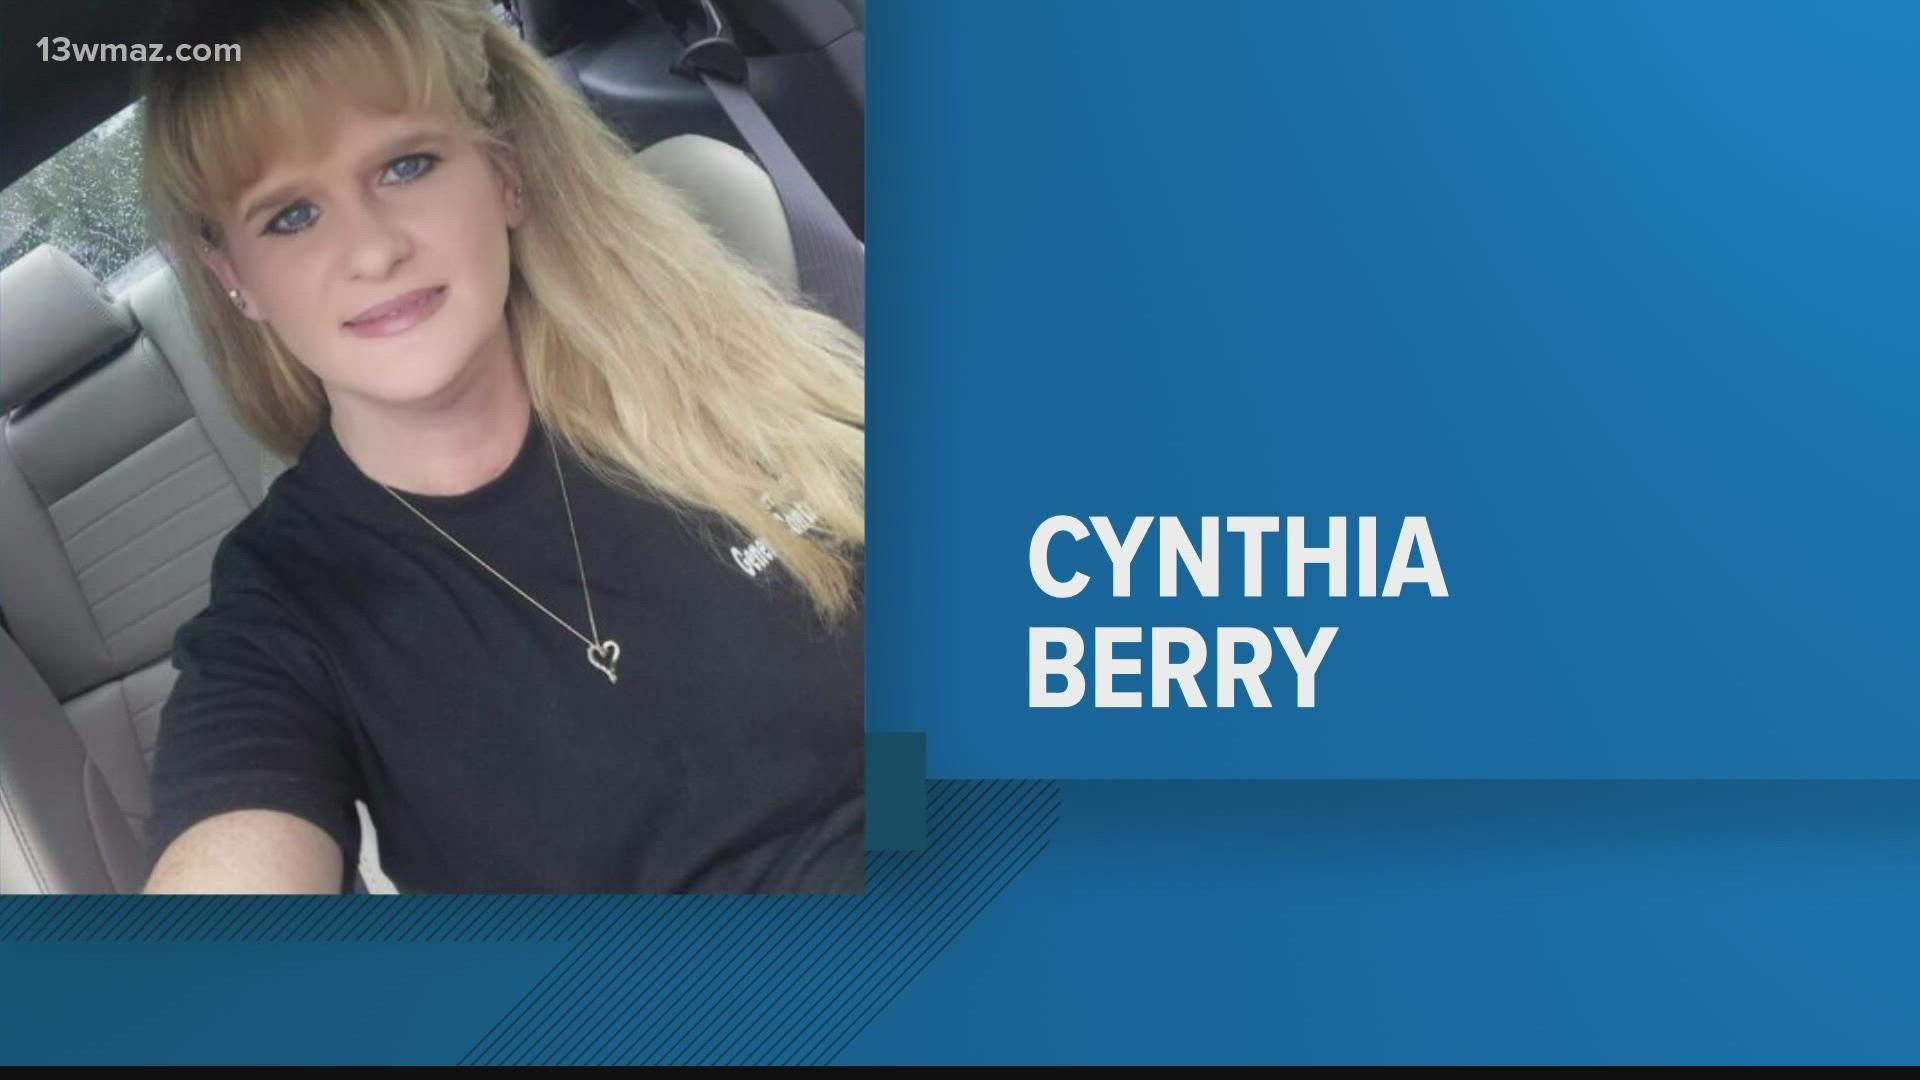 Five months before she was killed in her Macon home, Cynthia Berry told a judge that her boyfriend choked her, grabbed her arm, and threatened to break it.